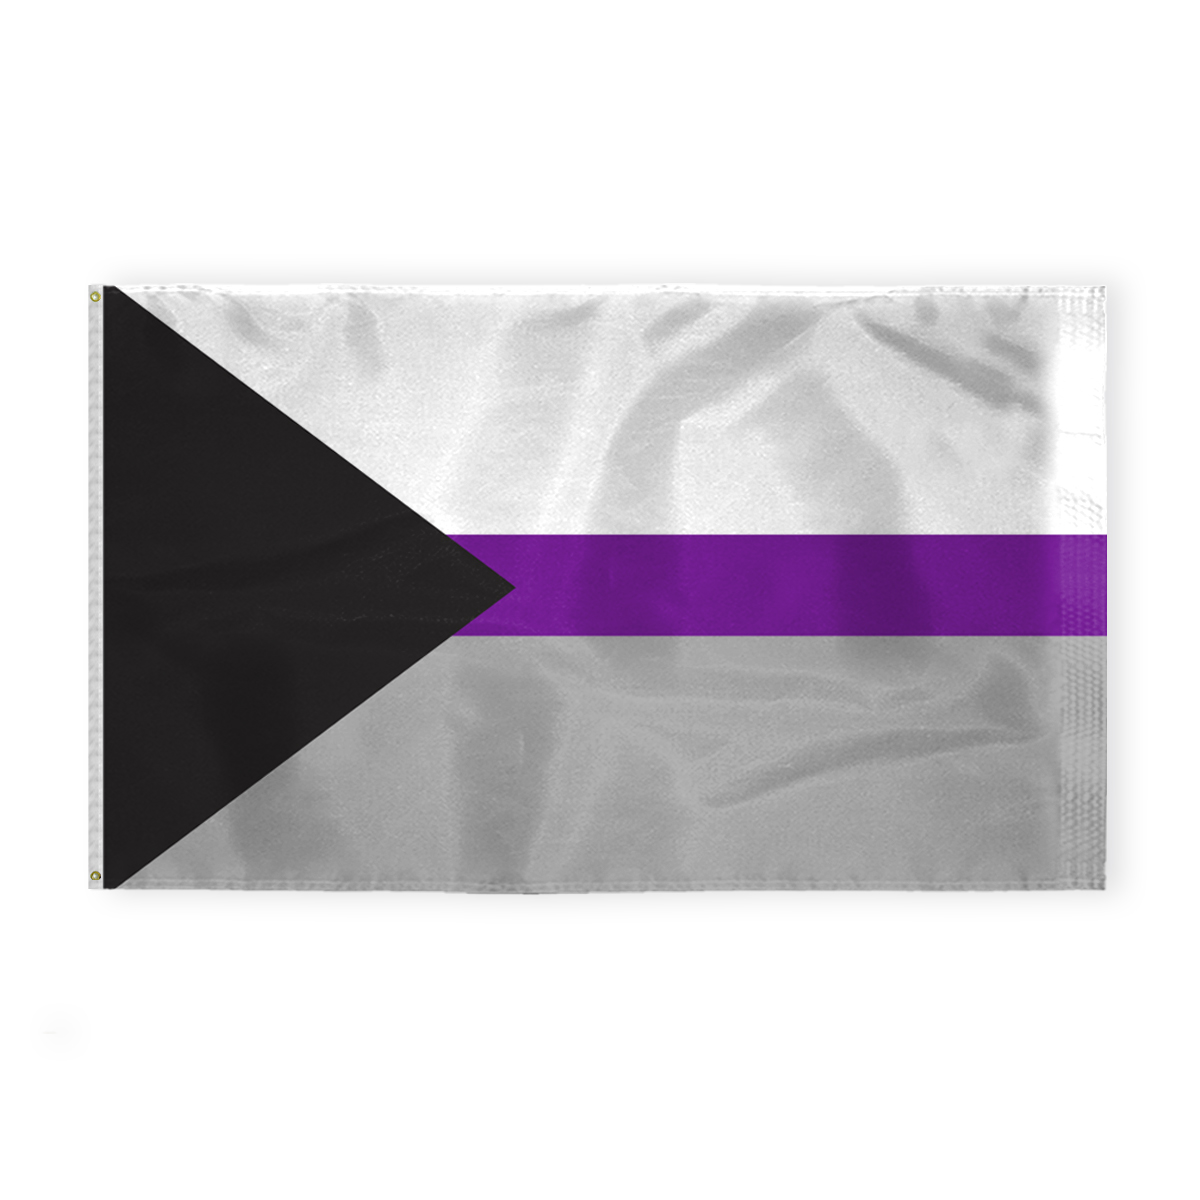 AGAS Large Demisexual Pride Flag 6x10 Ft